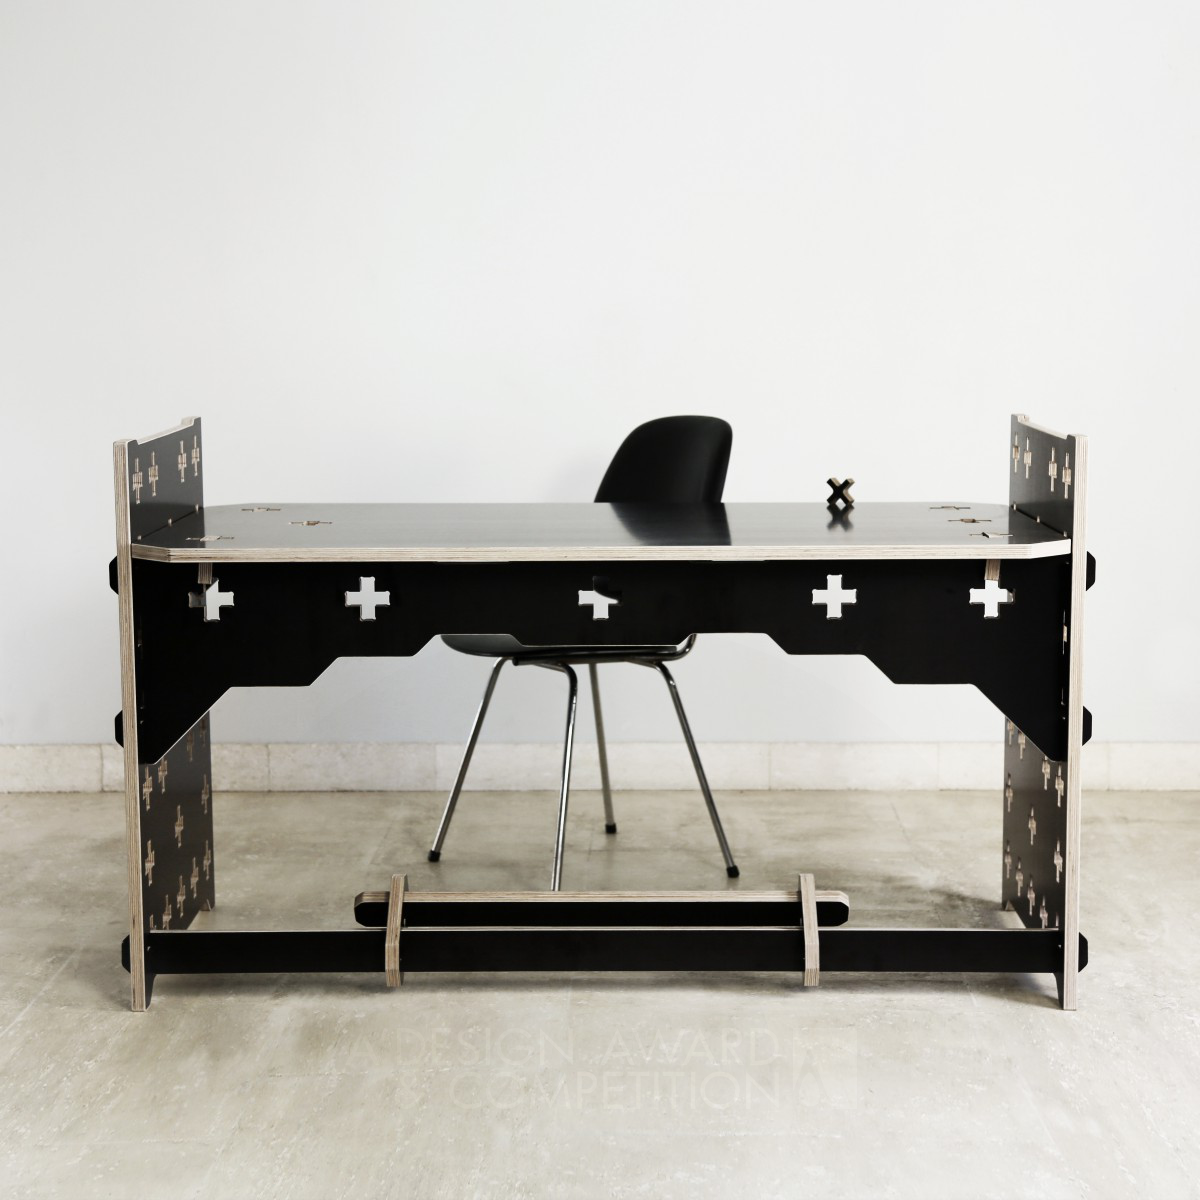 Puls Agile Furniture by yves-marie Geffroy